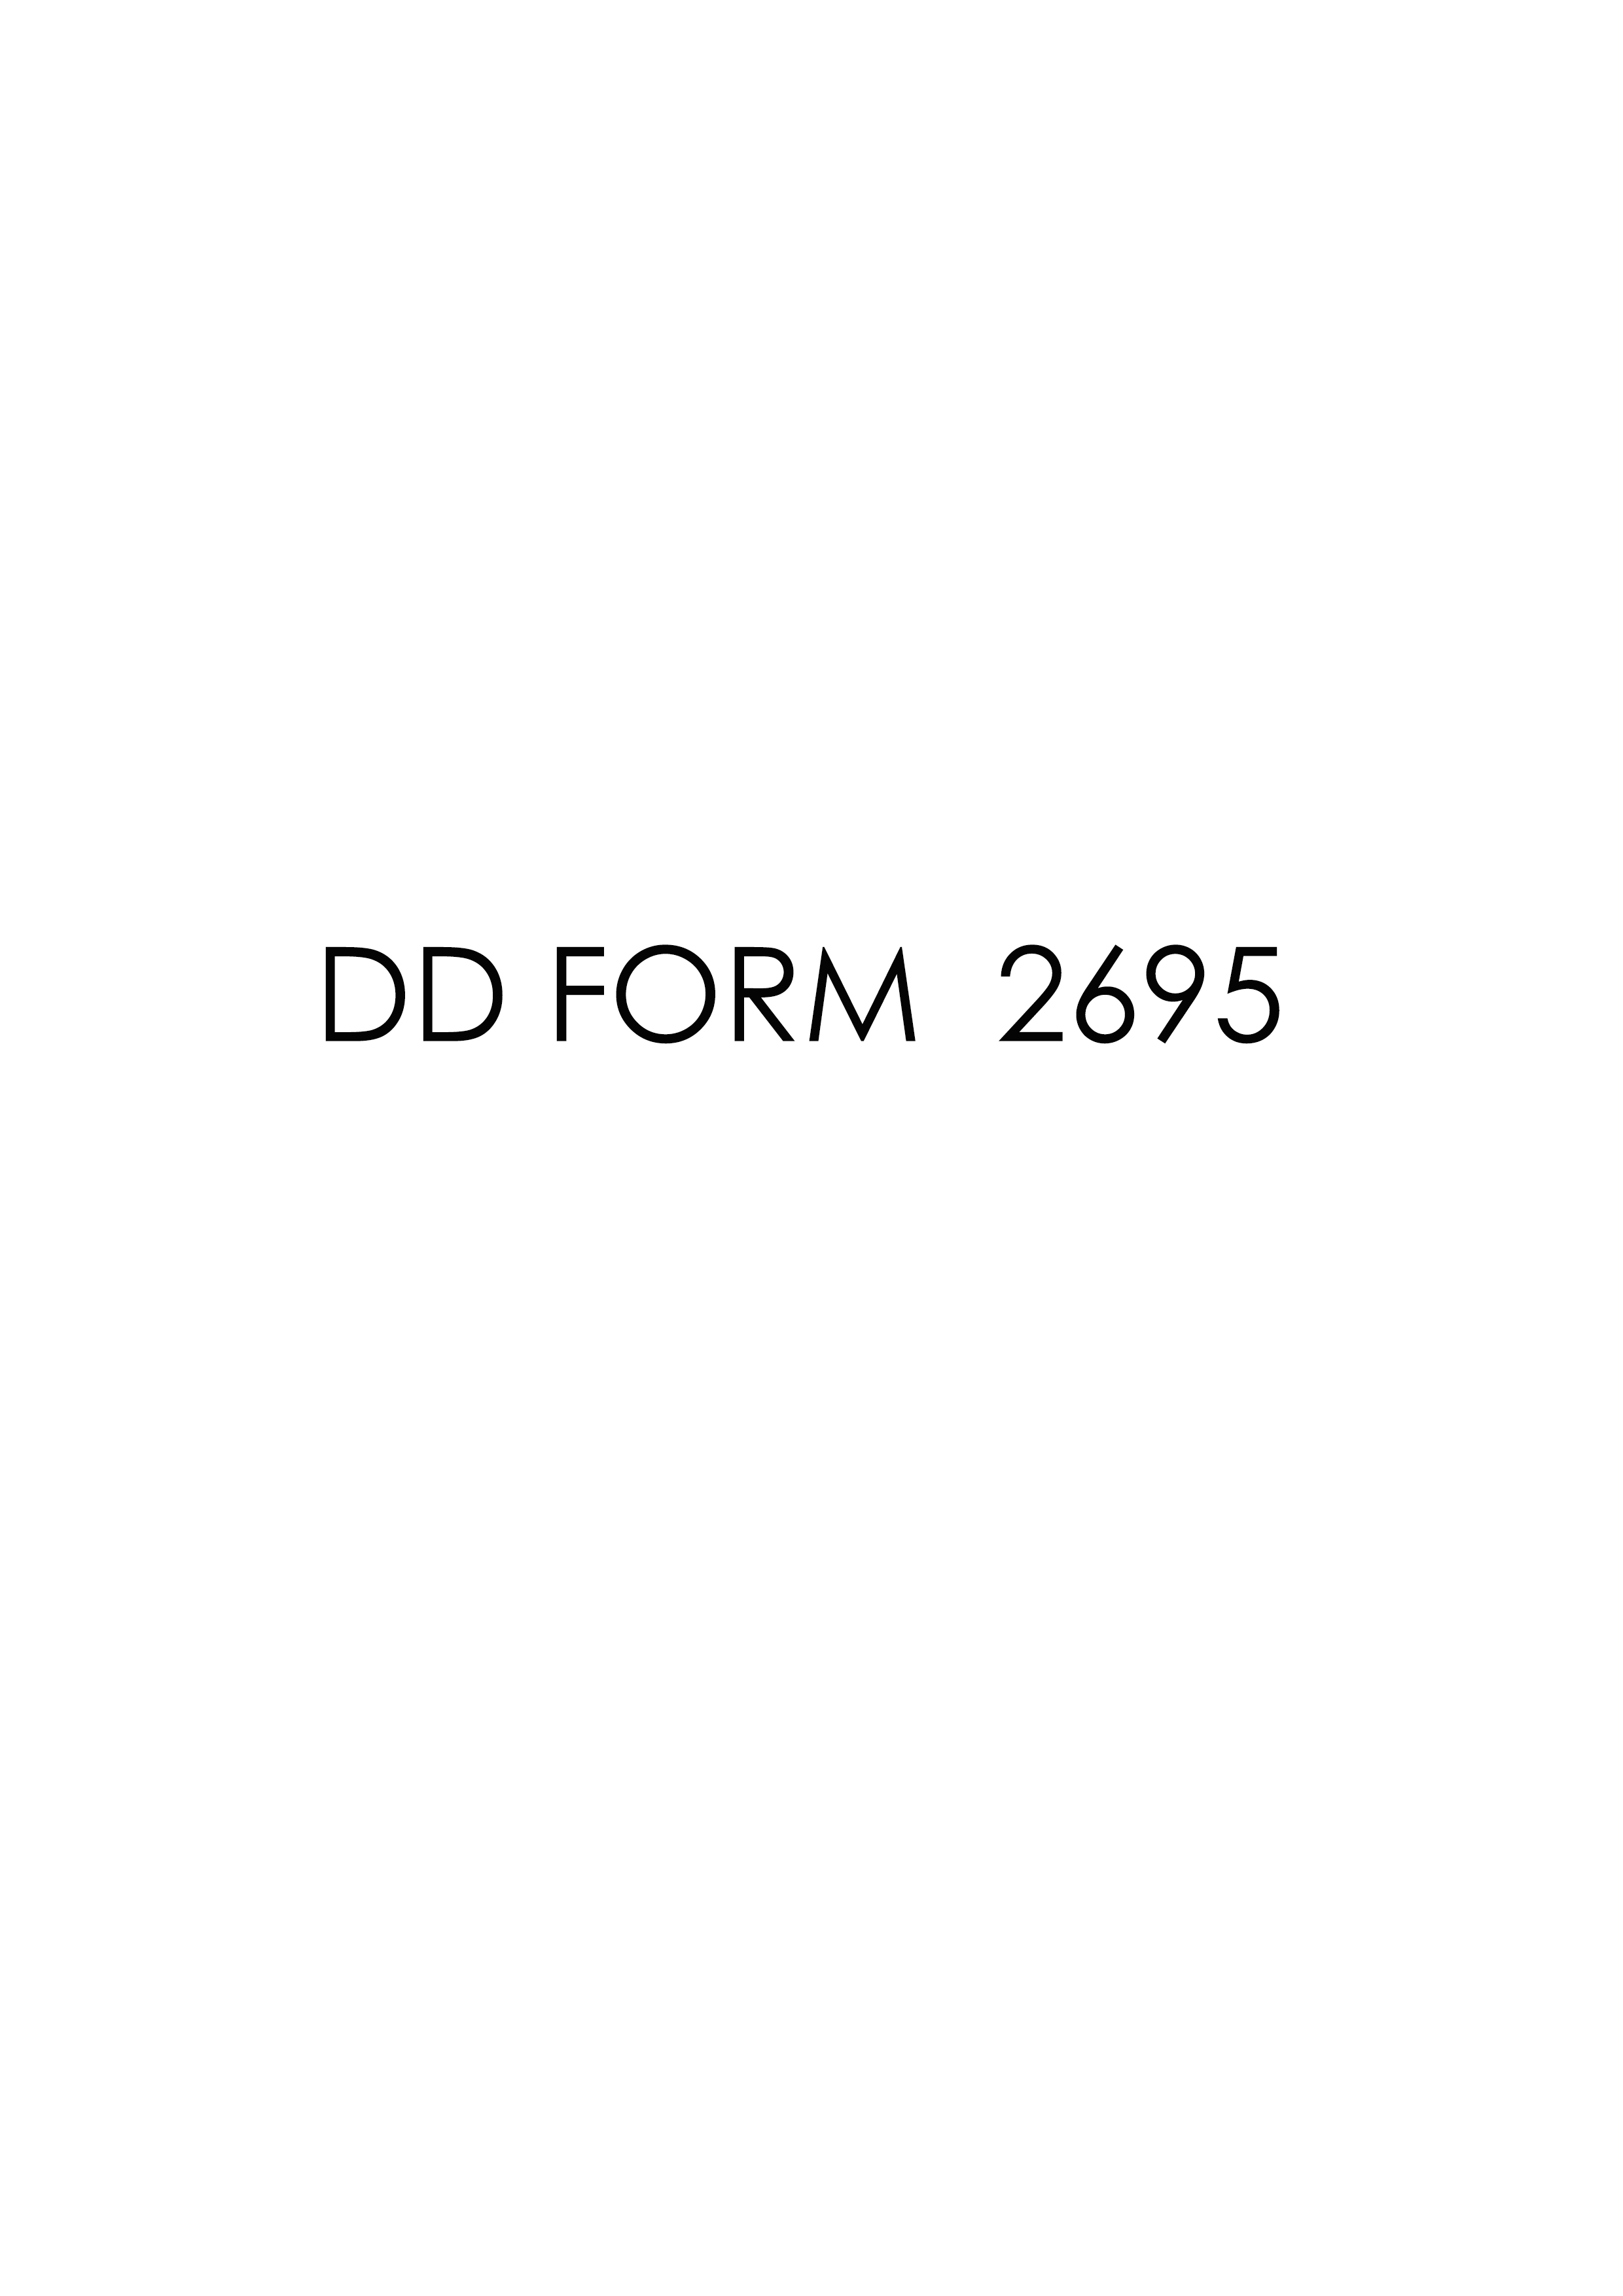 Download Fillable dd Form 2695